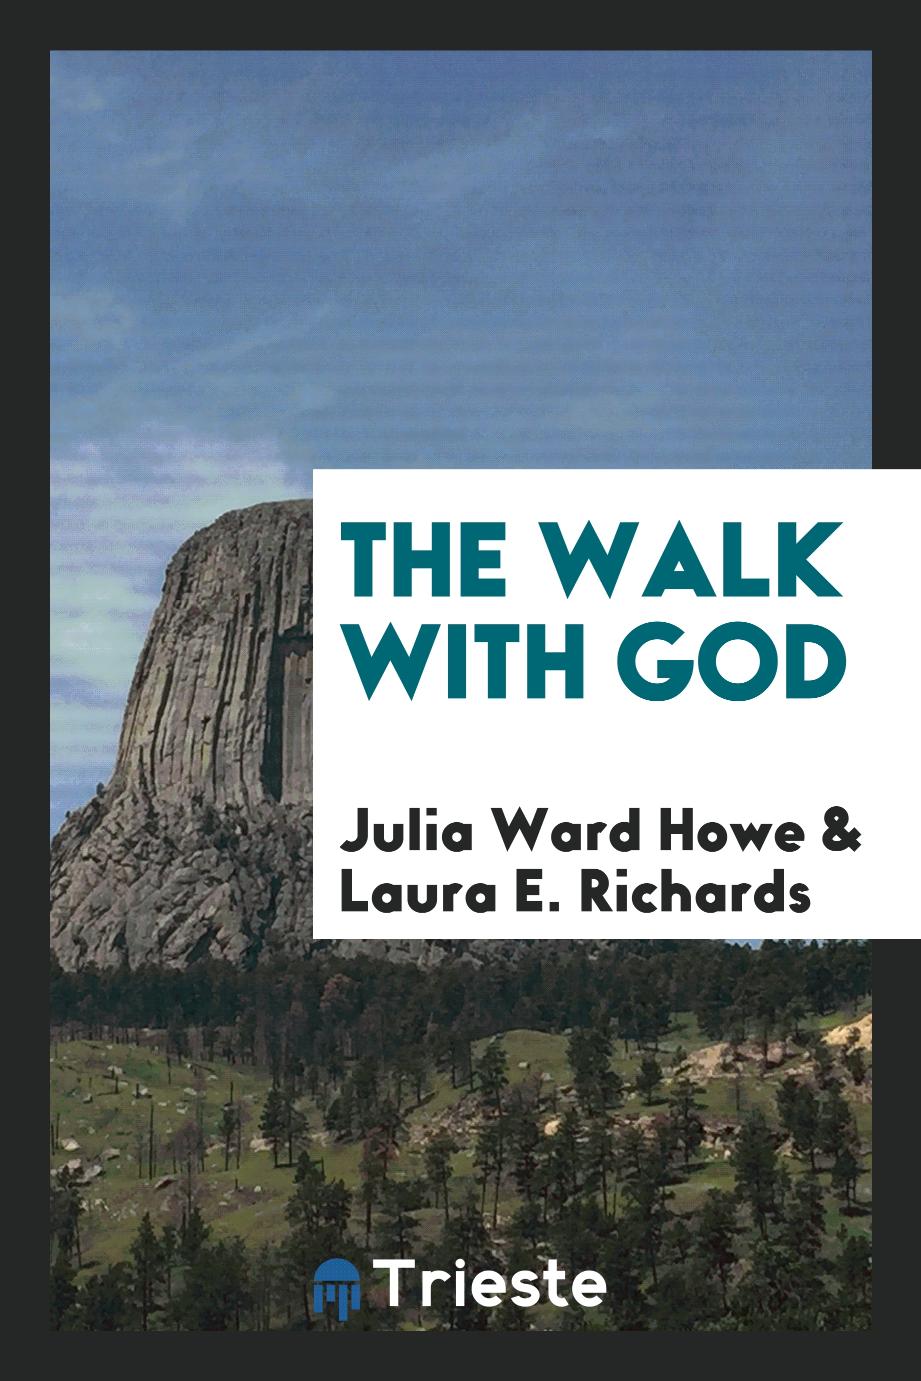 The walk with God